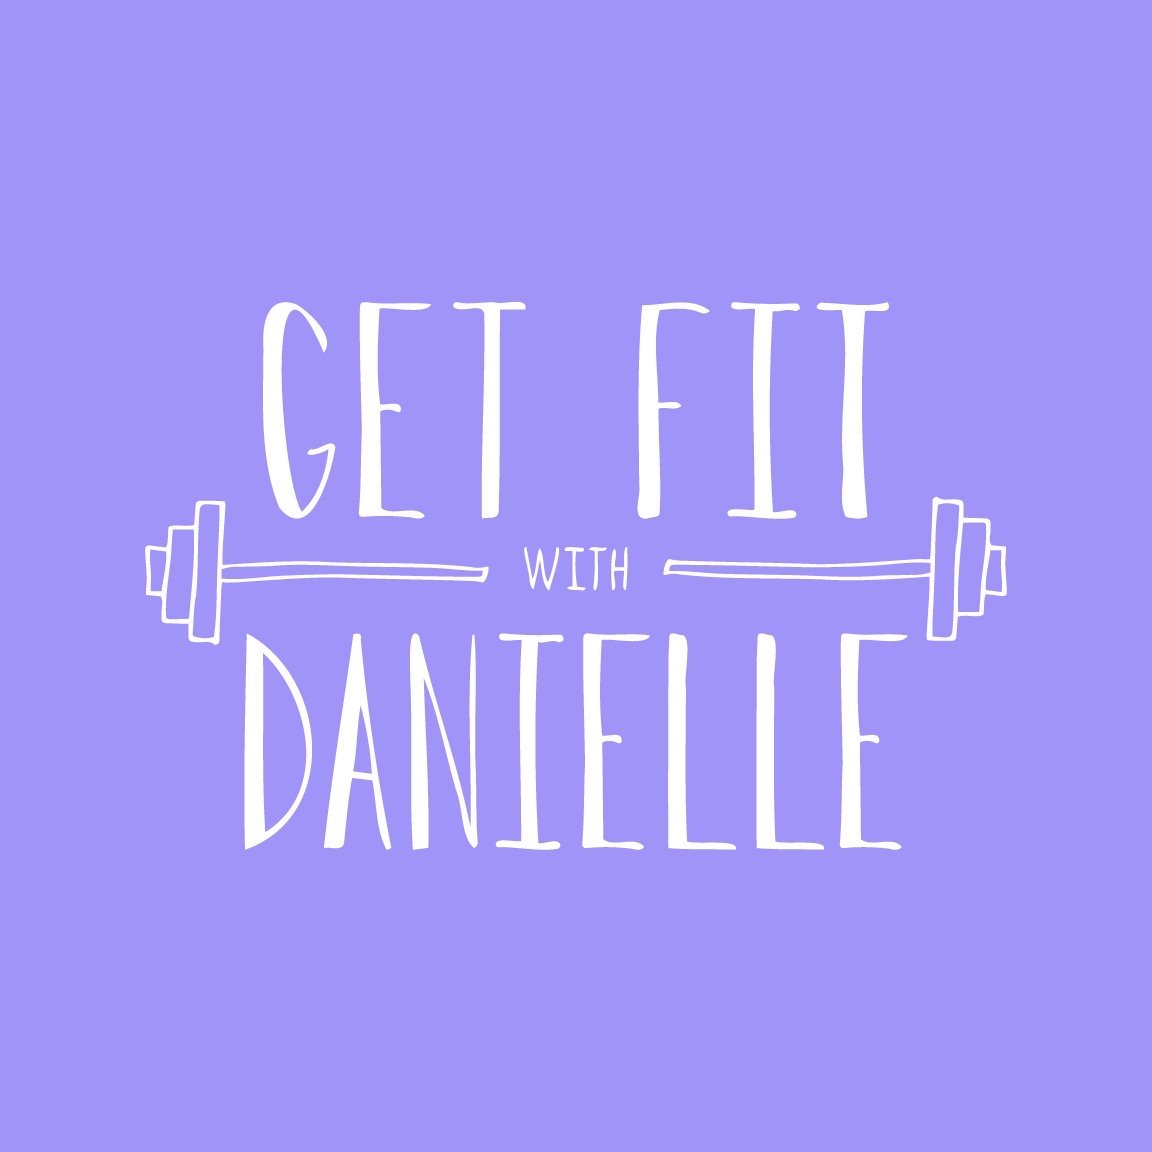 Get Fit With Danielle